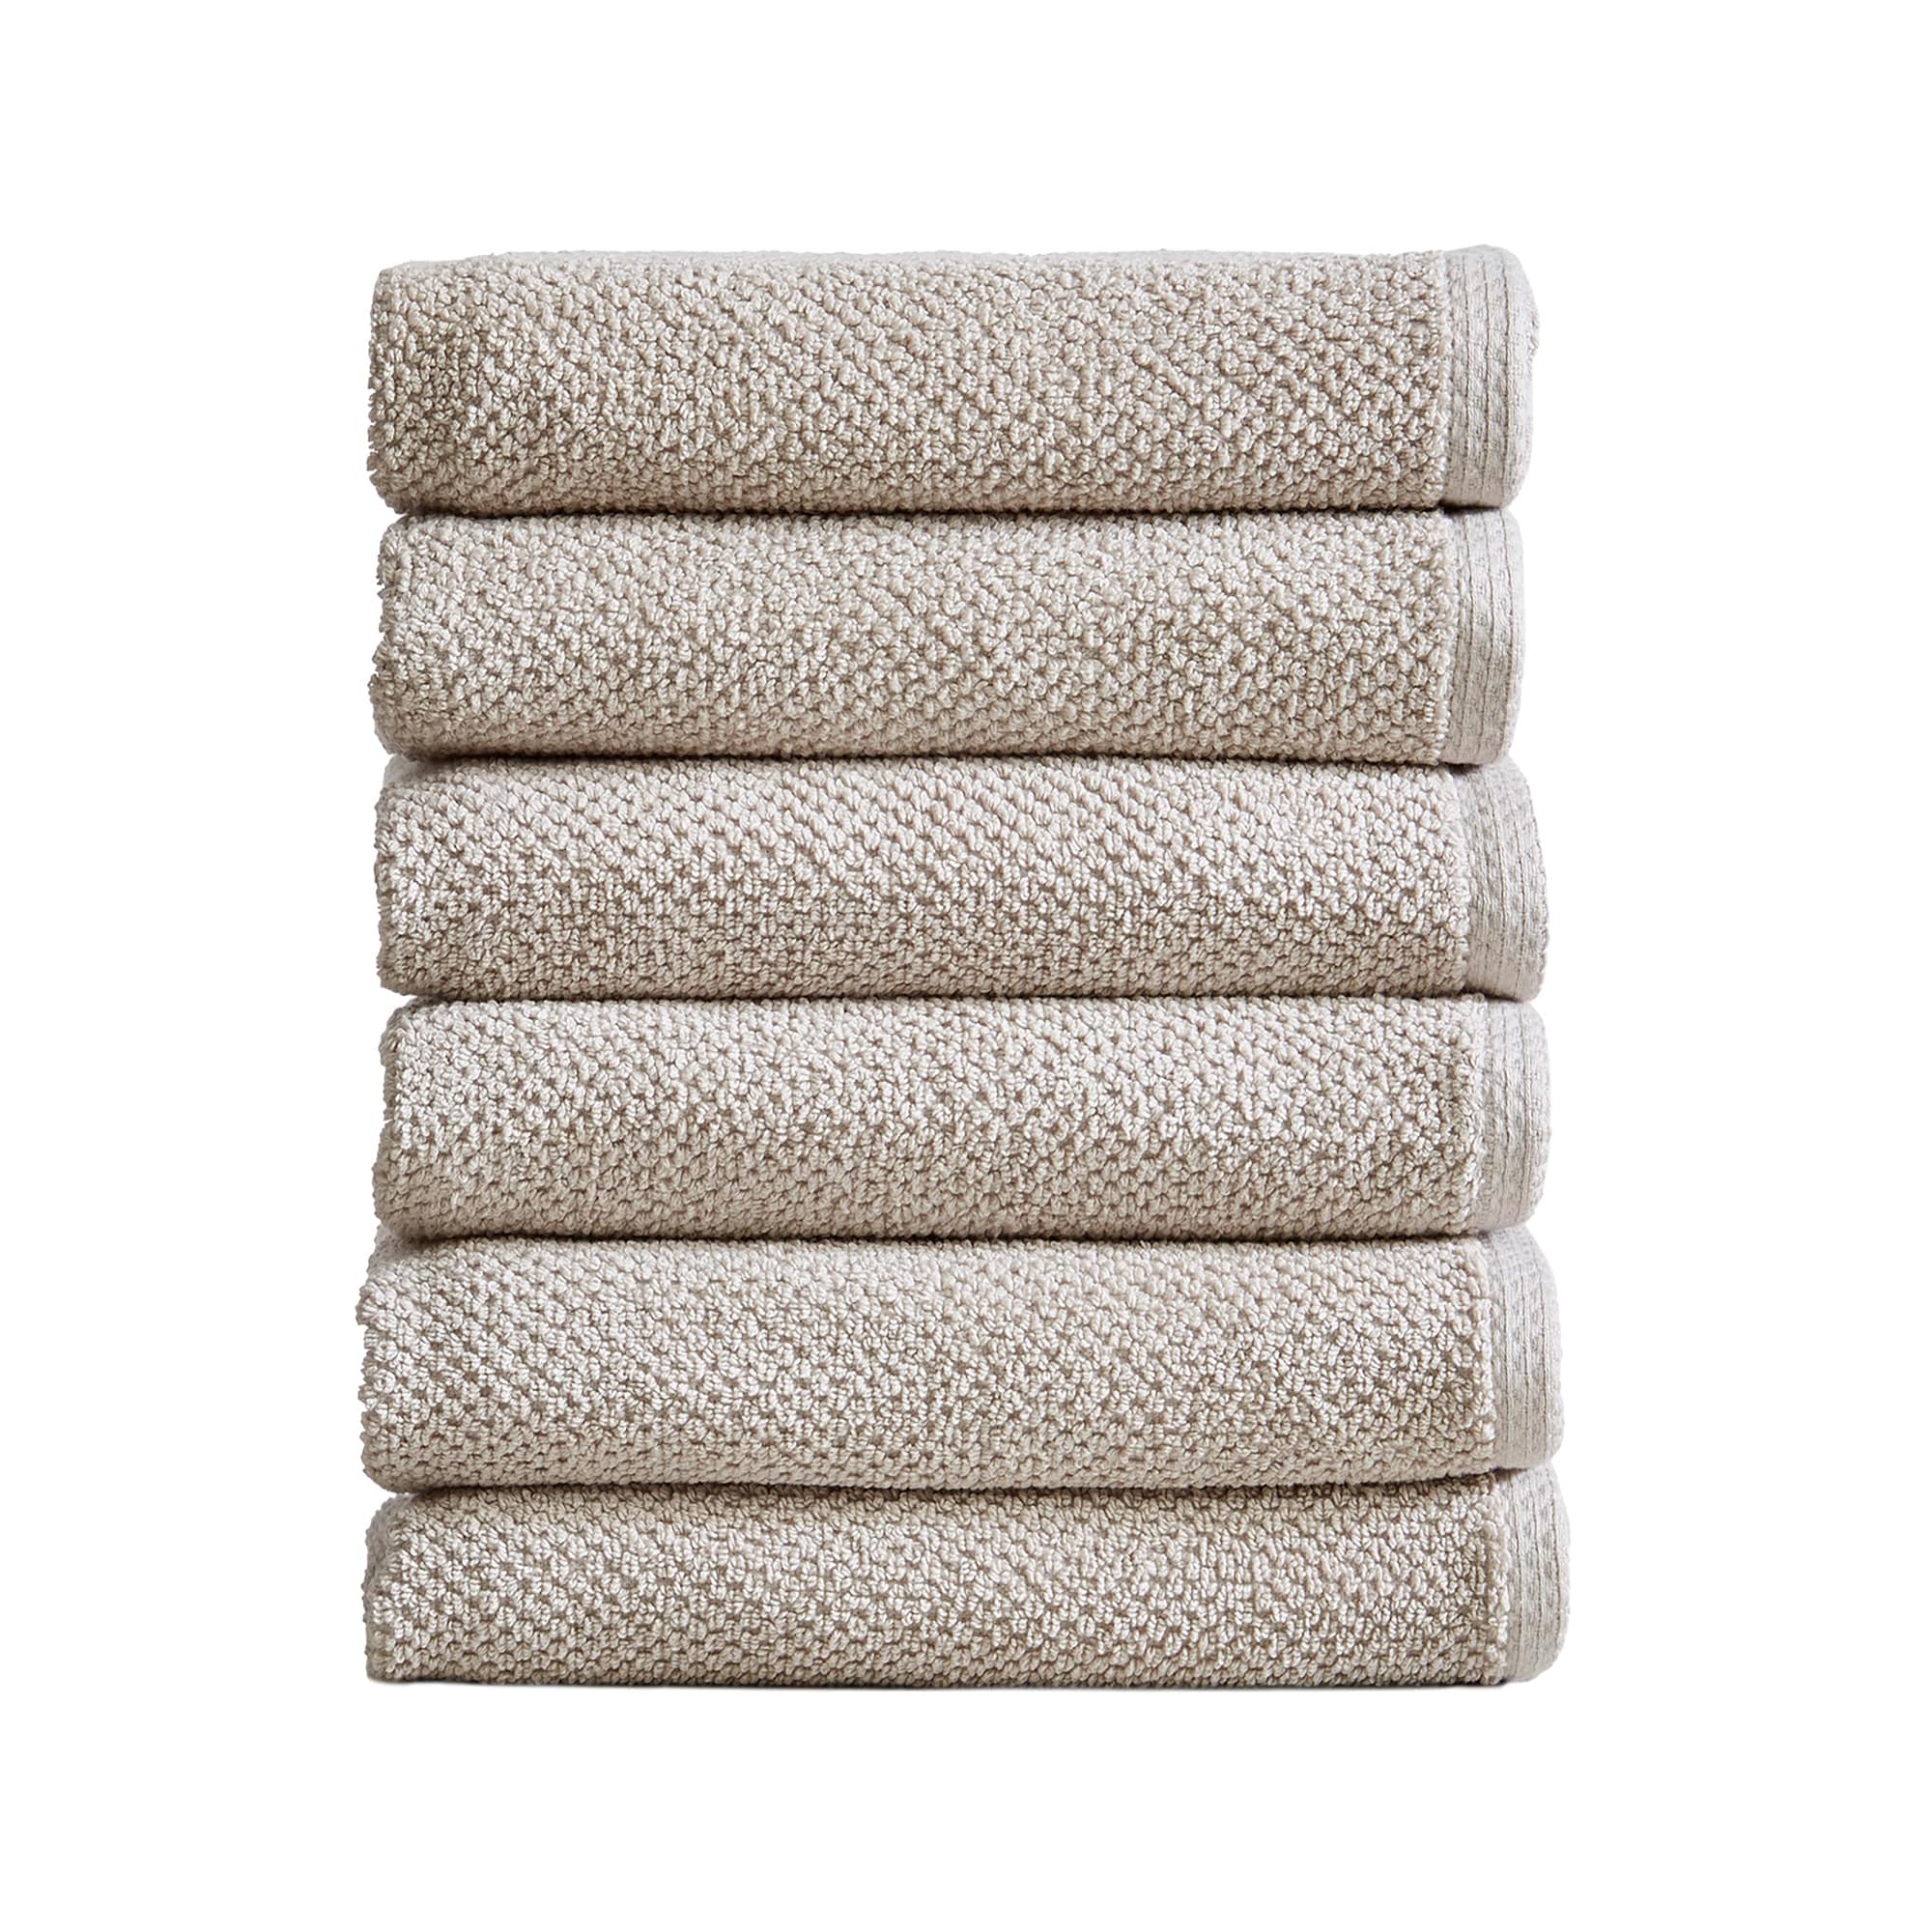 https://ak1.ostkcdn.com/images/products/is/images/direct/863afe372763f098c06c4f014463489e67aaf5c4/Great-Bay-Home-Ultra-Absorbent-Cotton-Popcorn-Towel-Set-Acacia-Collection.jpg